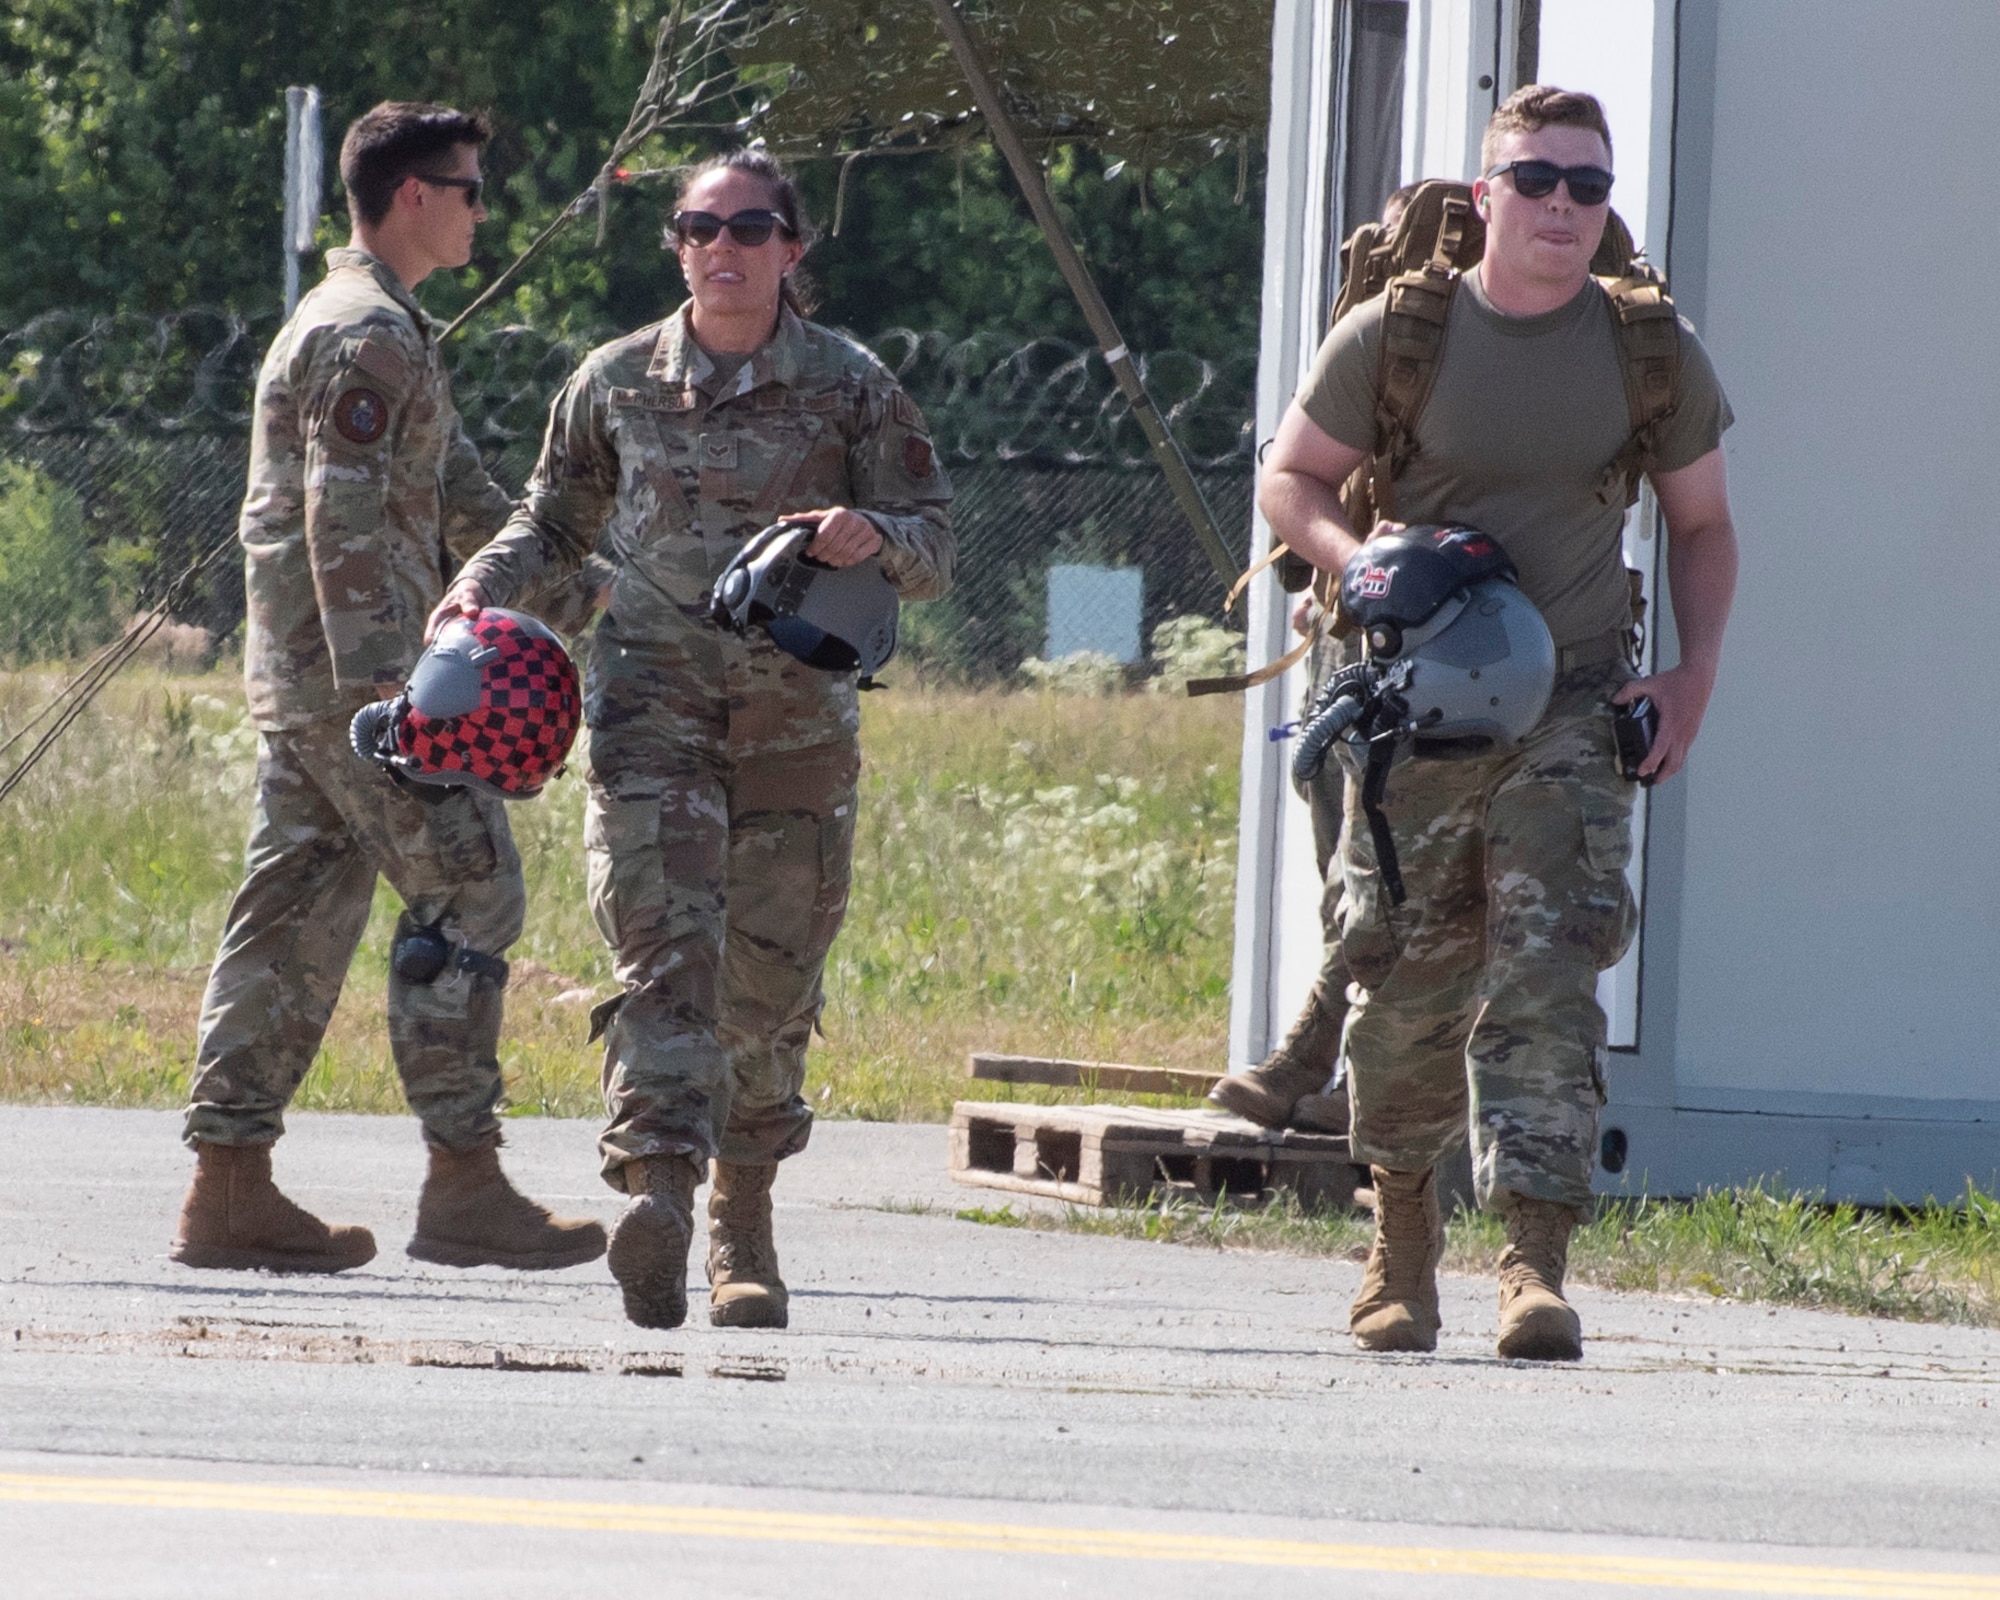 A female Airman (left) and male Airman (right) walk with purpose in forground, carrying pilot helmet and other flight suit gear.